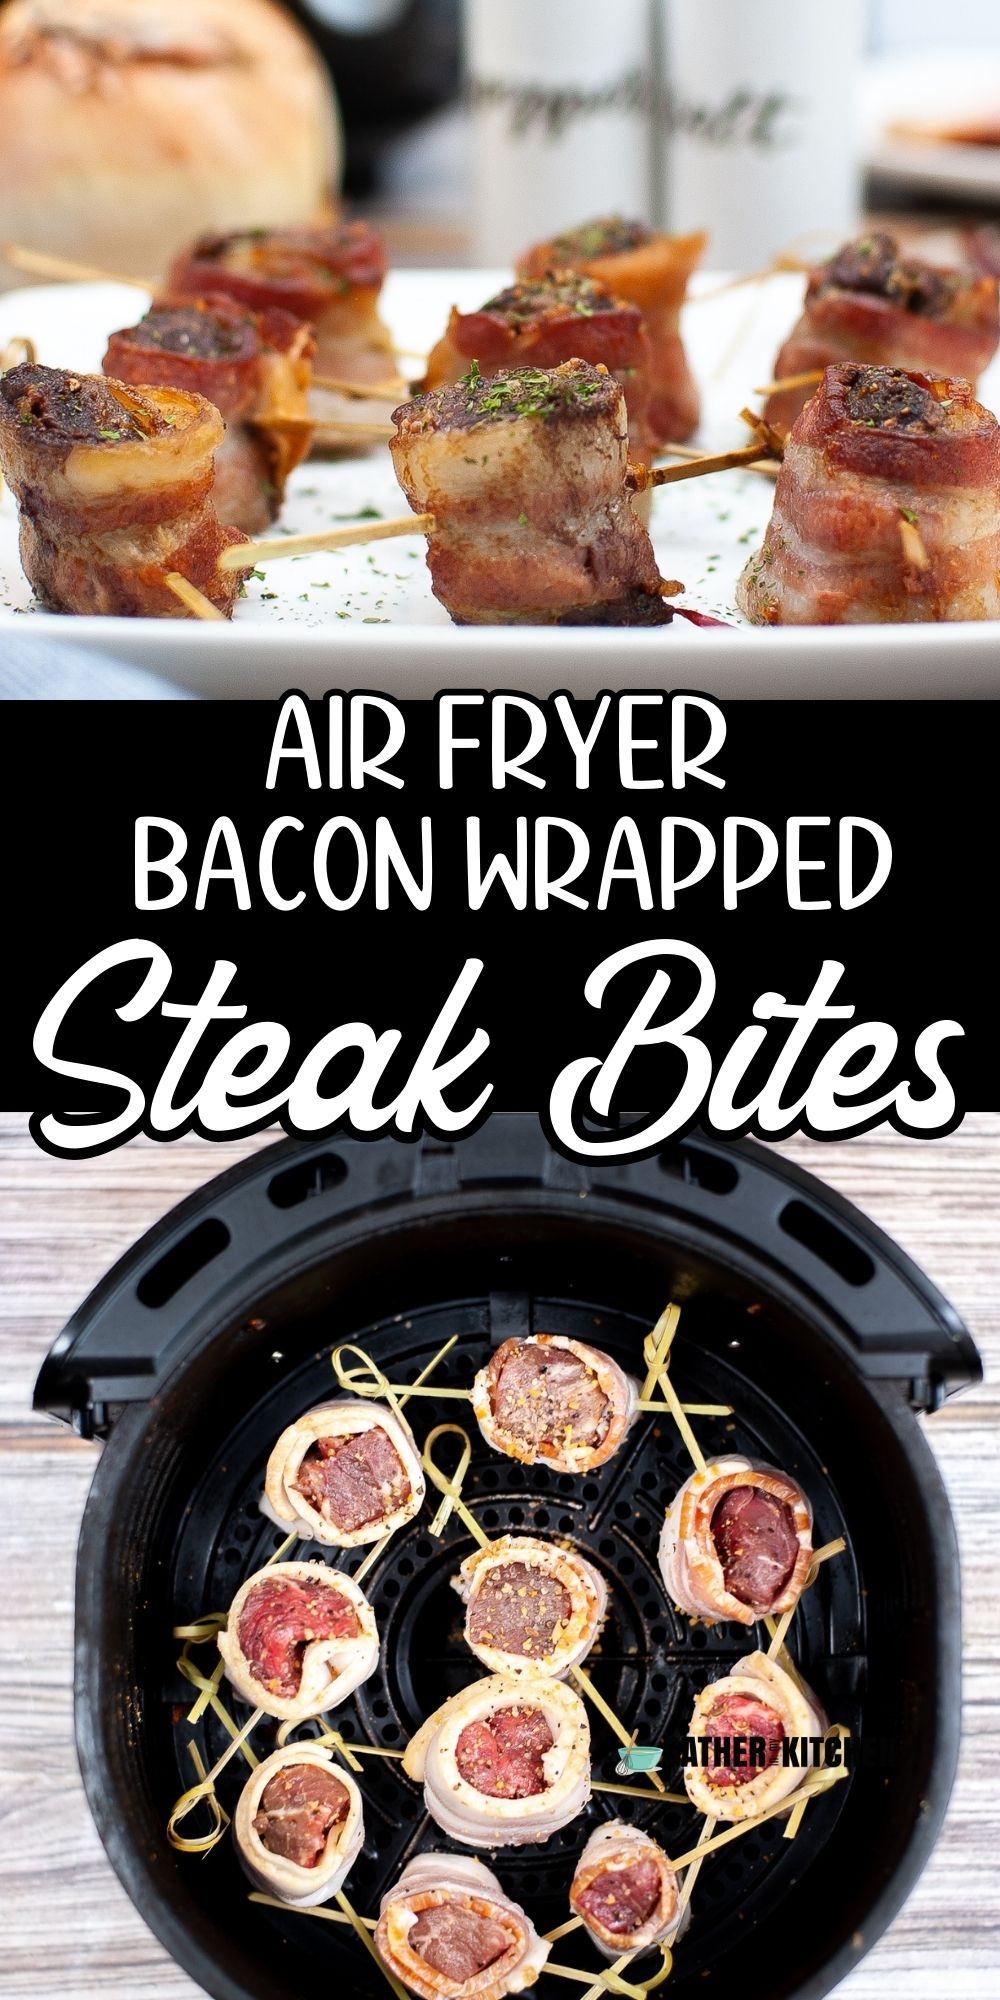 Pin image: top is a plate of air fryer steak bites, middle says "Air Fryer Bacon Wrapped Steak Bites" and bottom is a top view of steak bites in the air fryer.